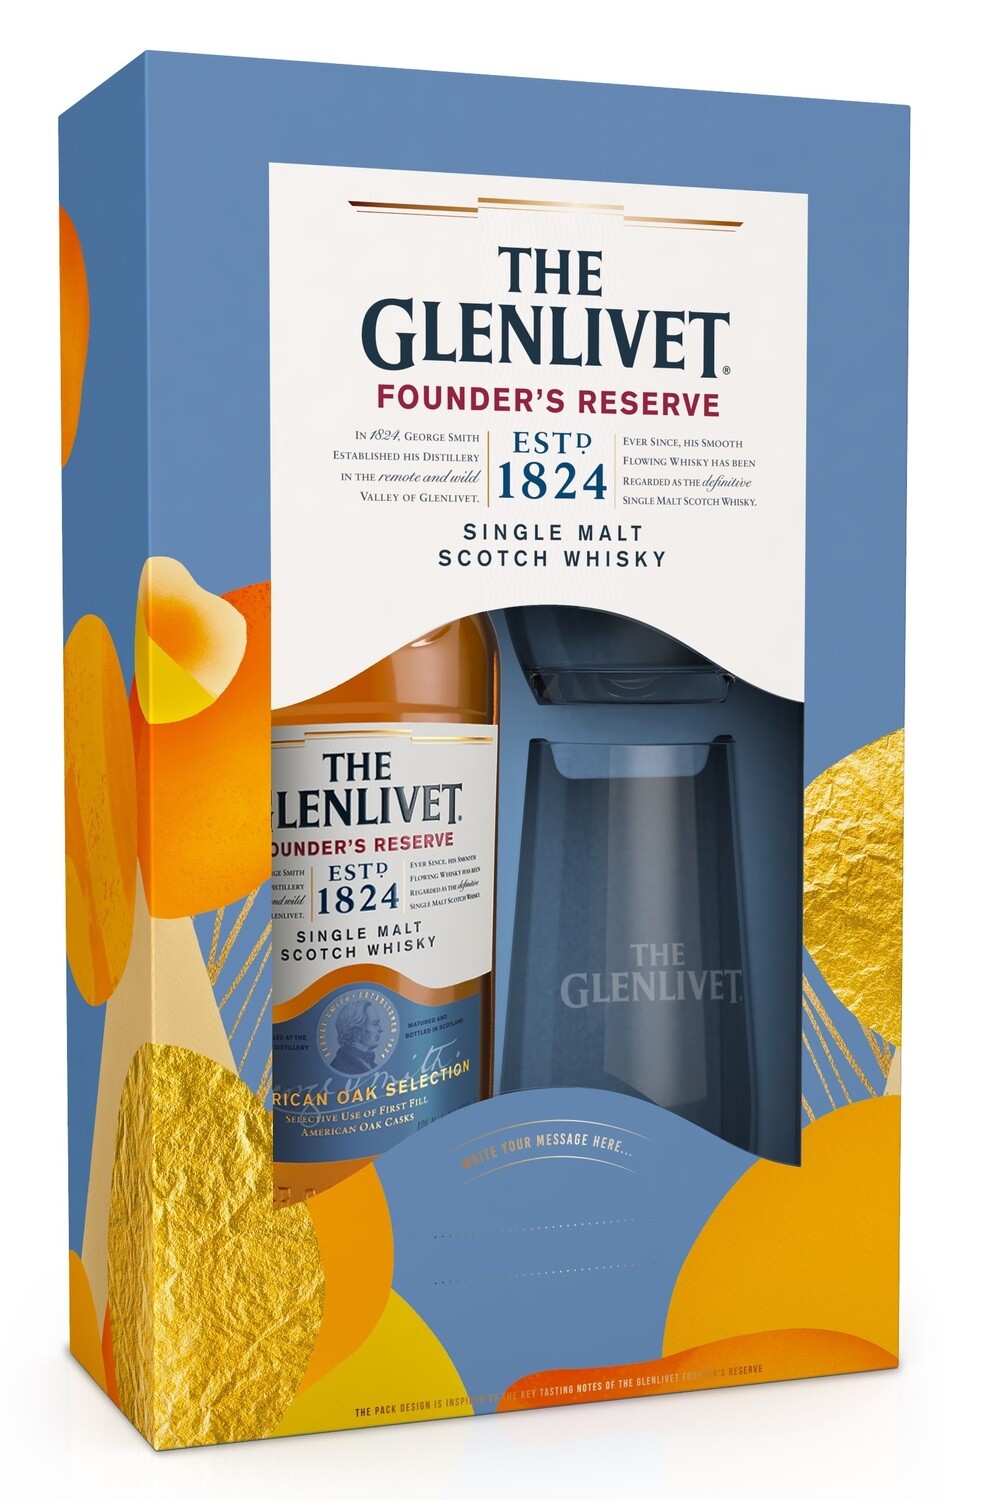 The Glenlivet 'Founder's Reserve' Single Malt Scotch Whisky (Limited Edition Gift Box with 2 High-Ball Glasses)